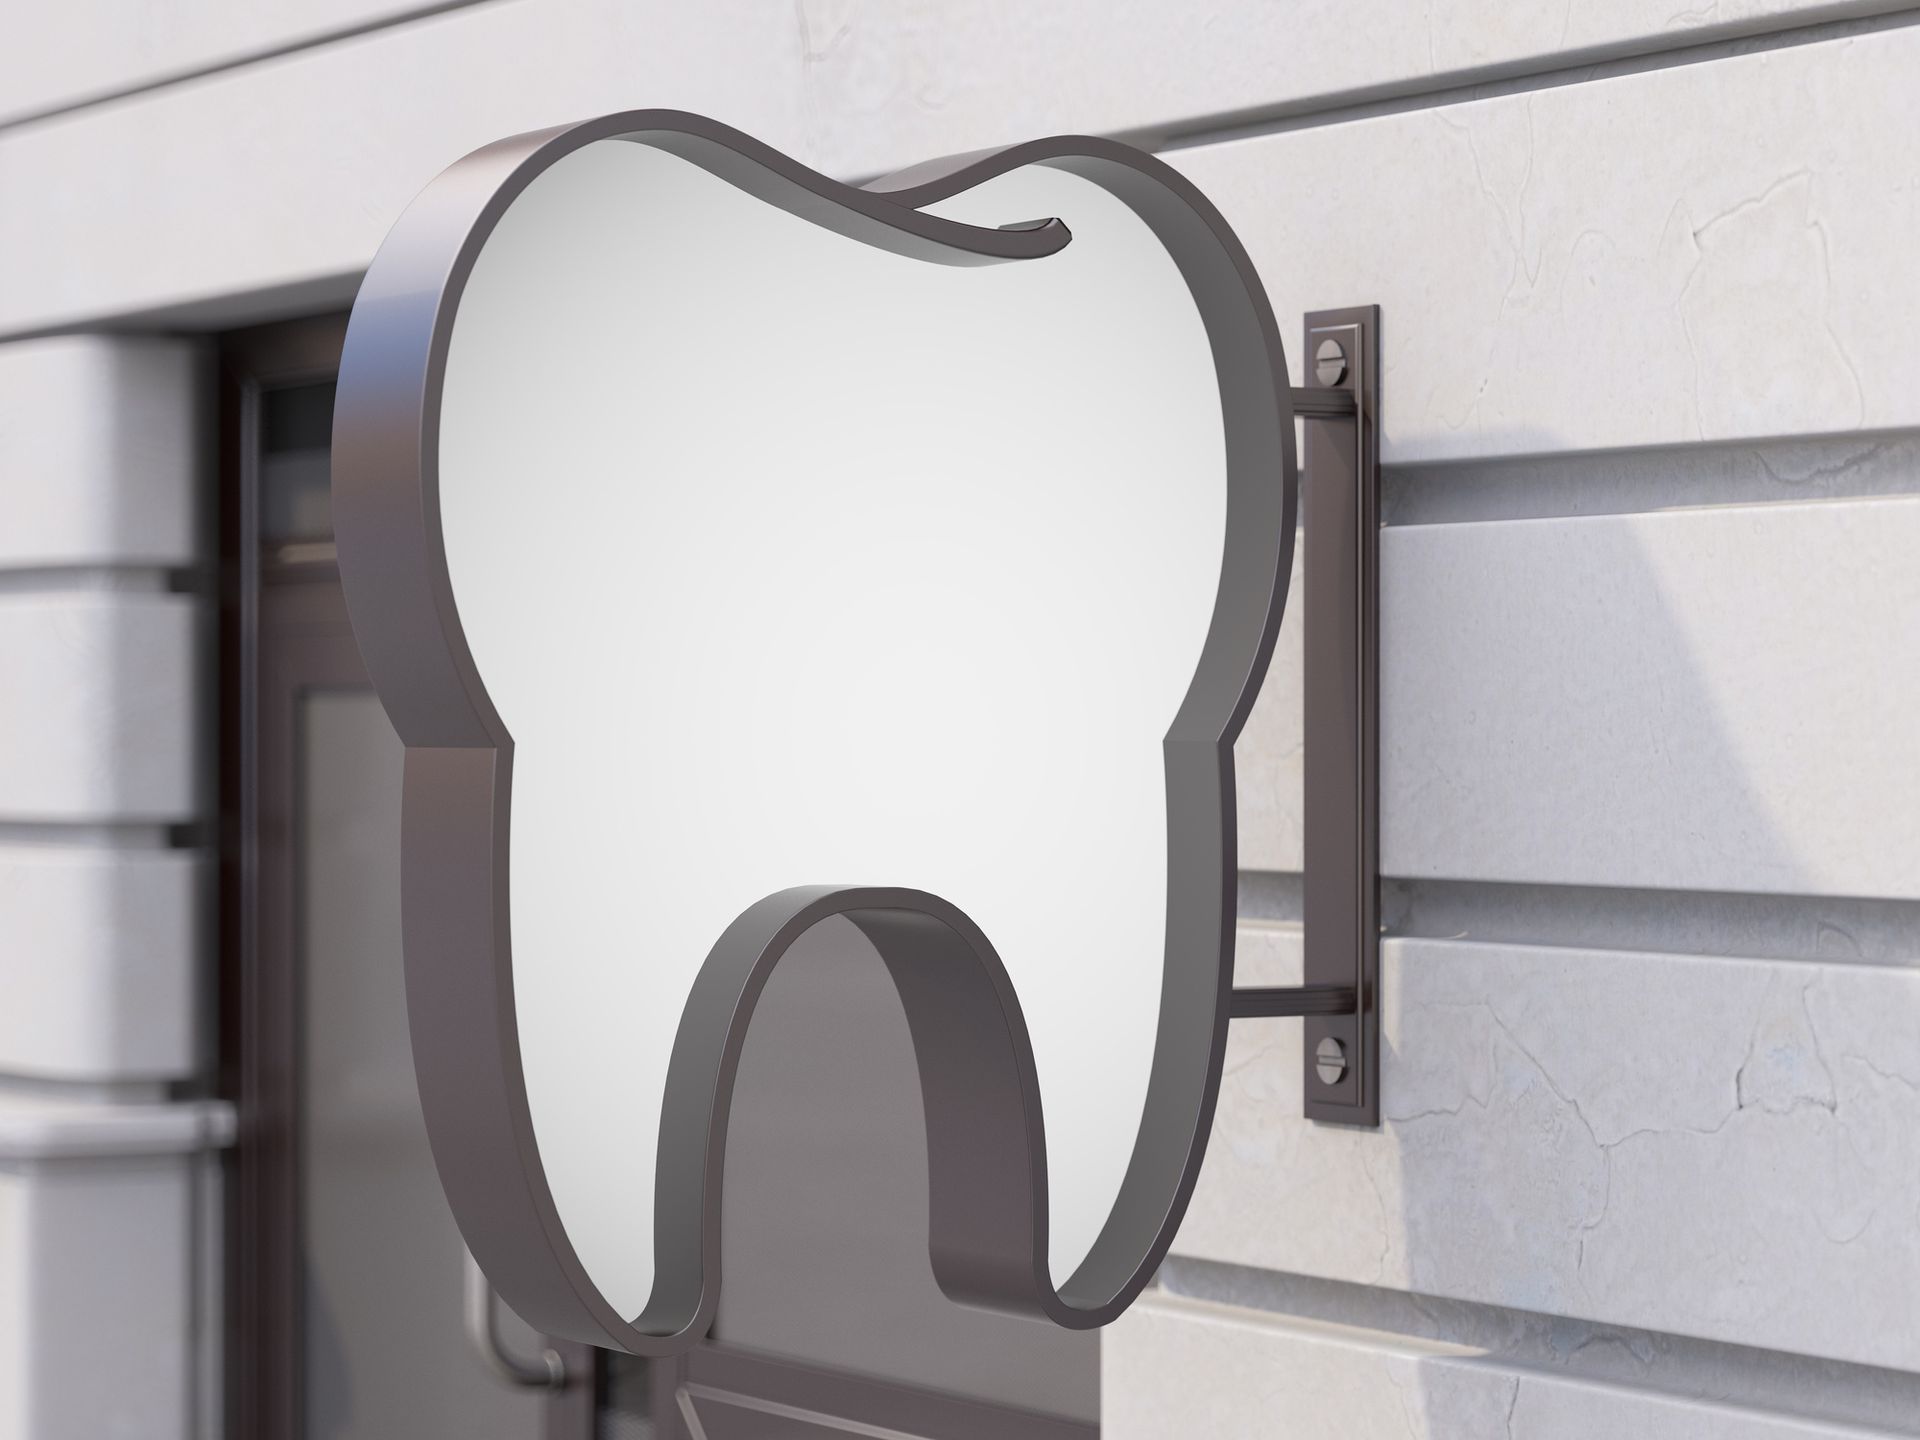 A sign in the shape of a tooth is on the side of a building.